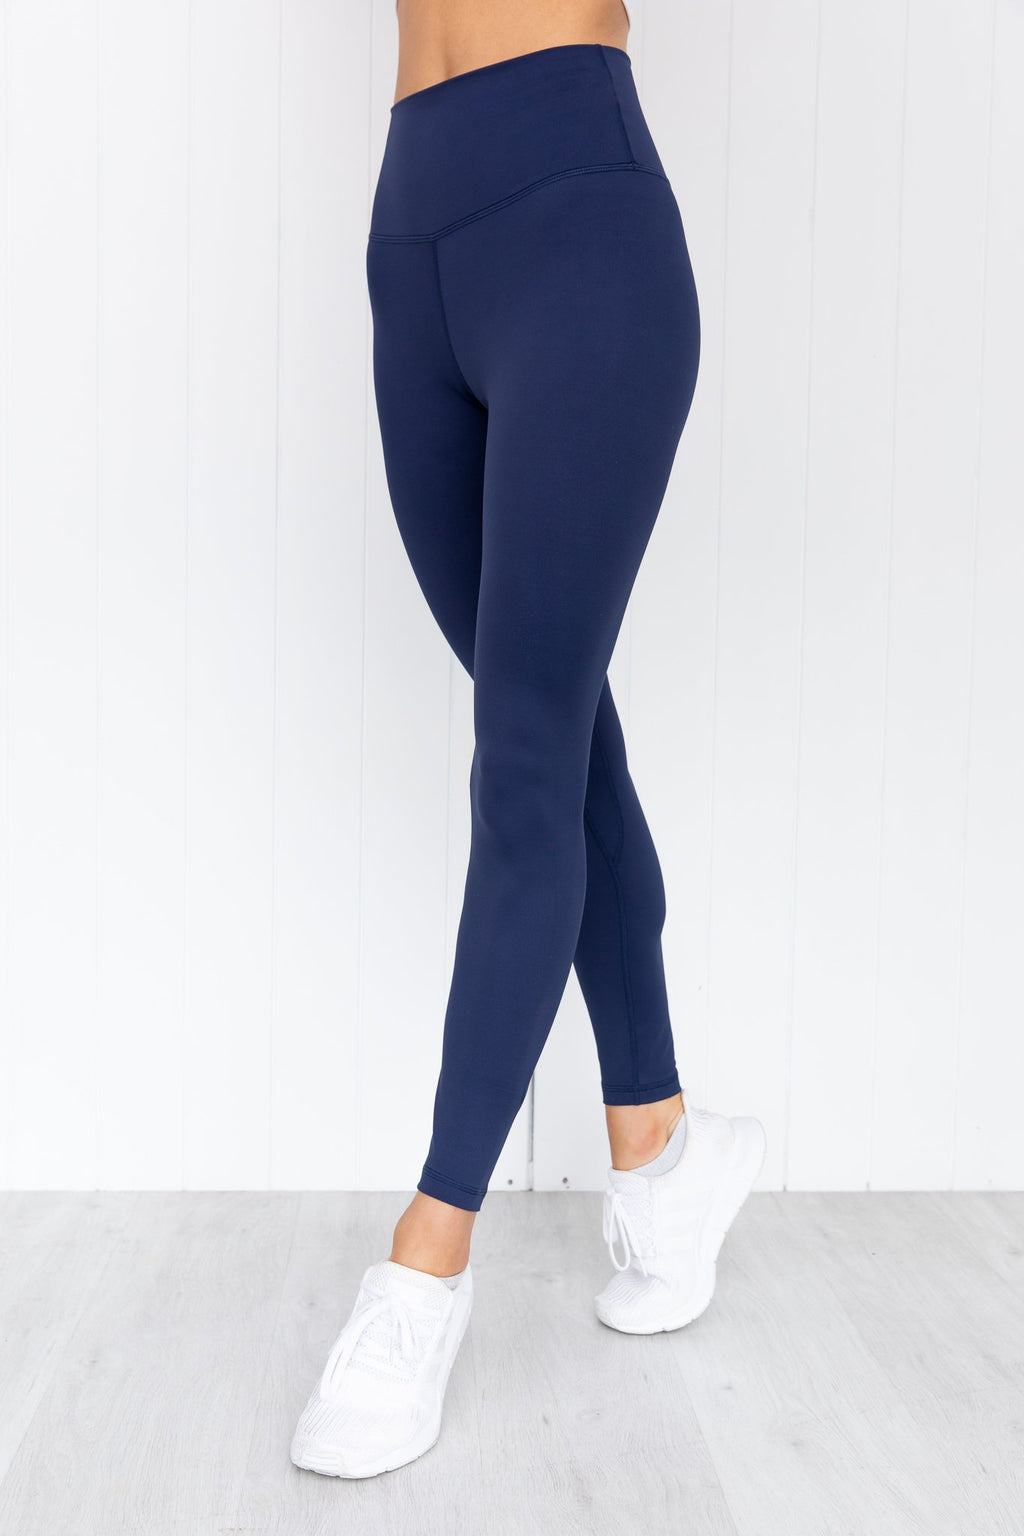 Panther High Rise Leggings - Midnight Navy